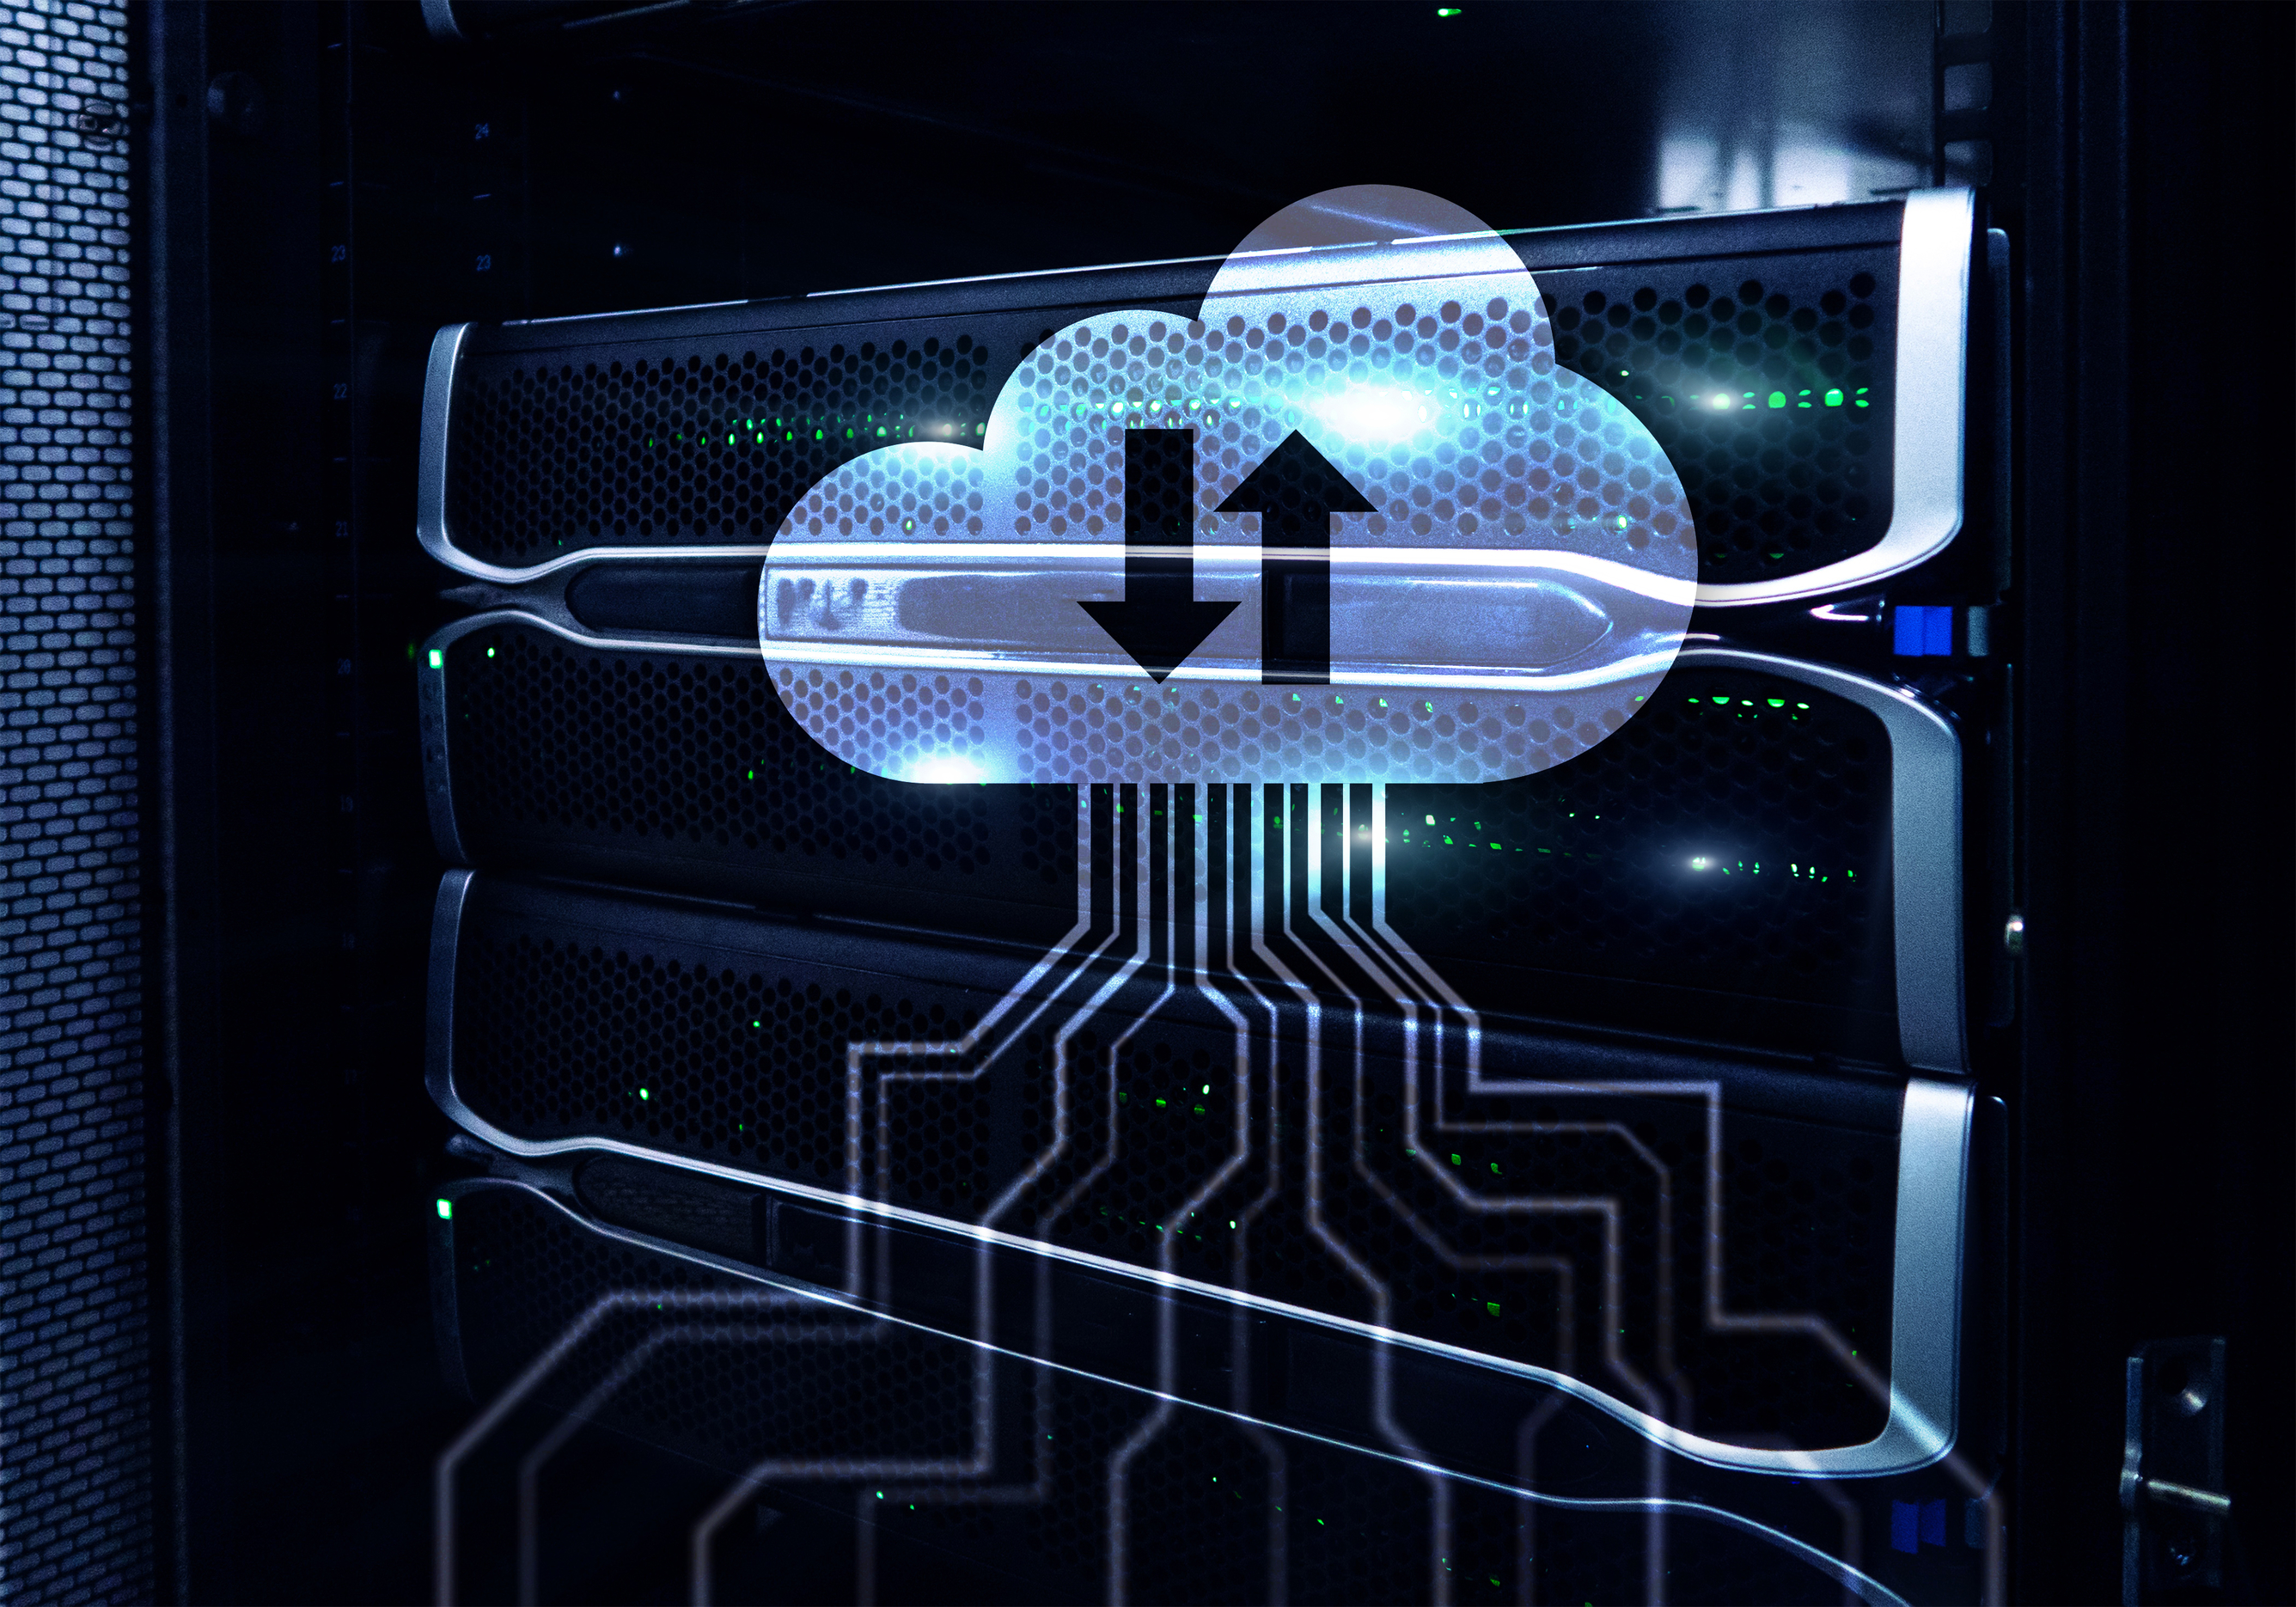 CLoud server and computing, data storage and processing. Internet and technology concept. 